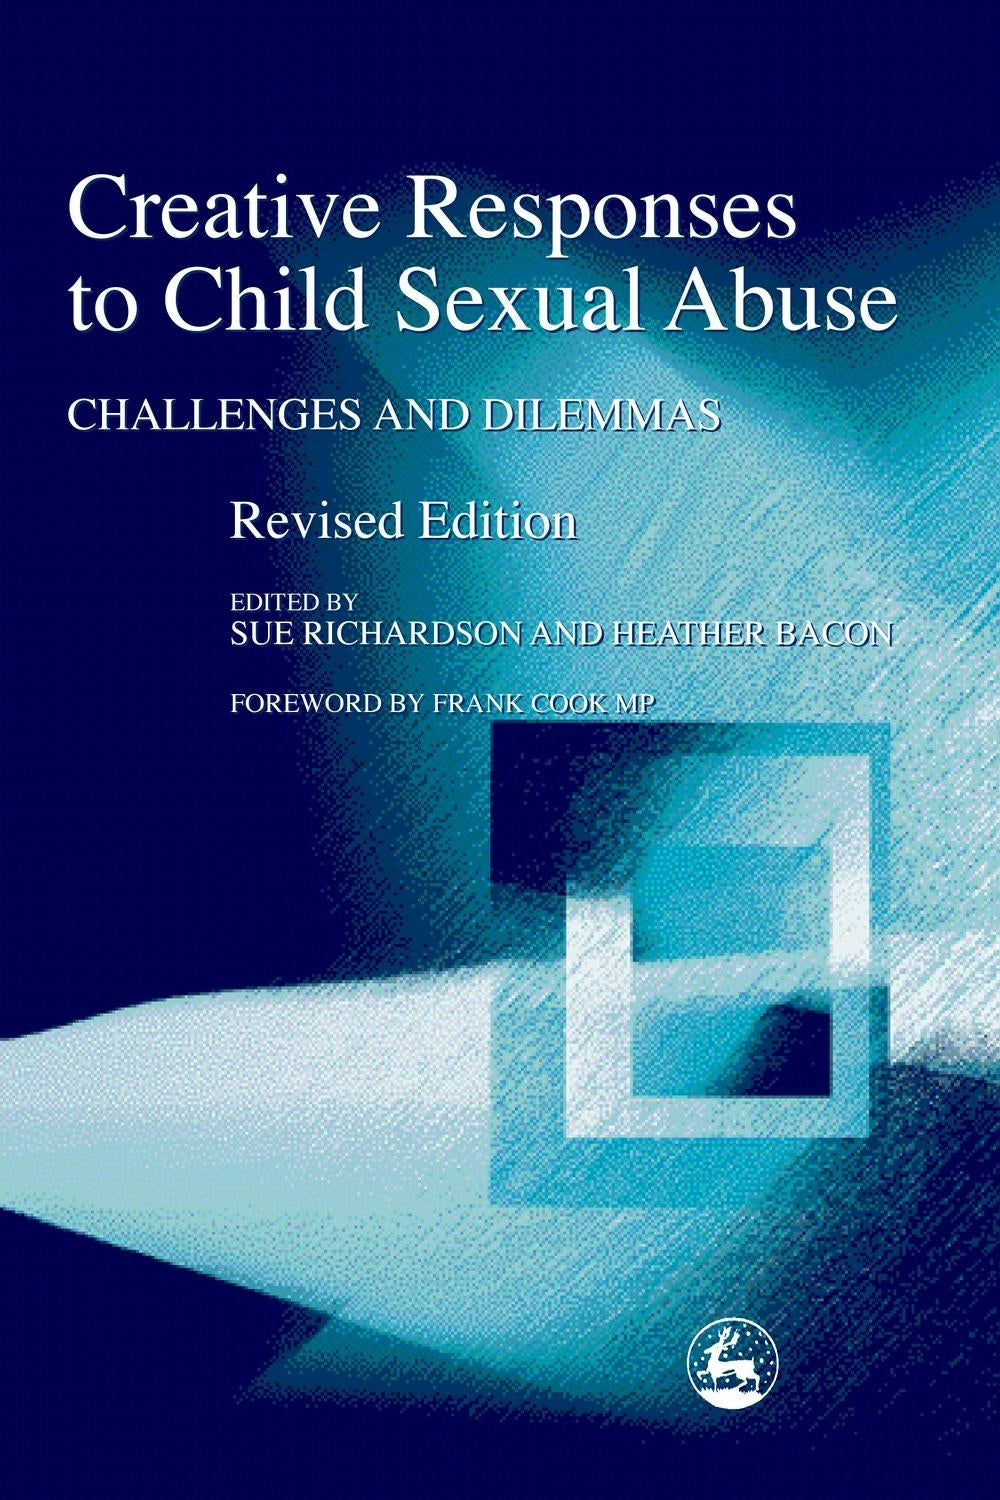 Creative Responses to Child Sexual Abuse by Heather Bacon, Sue Richardson